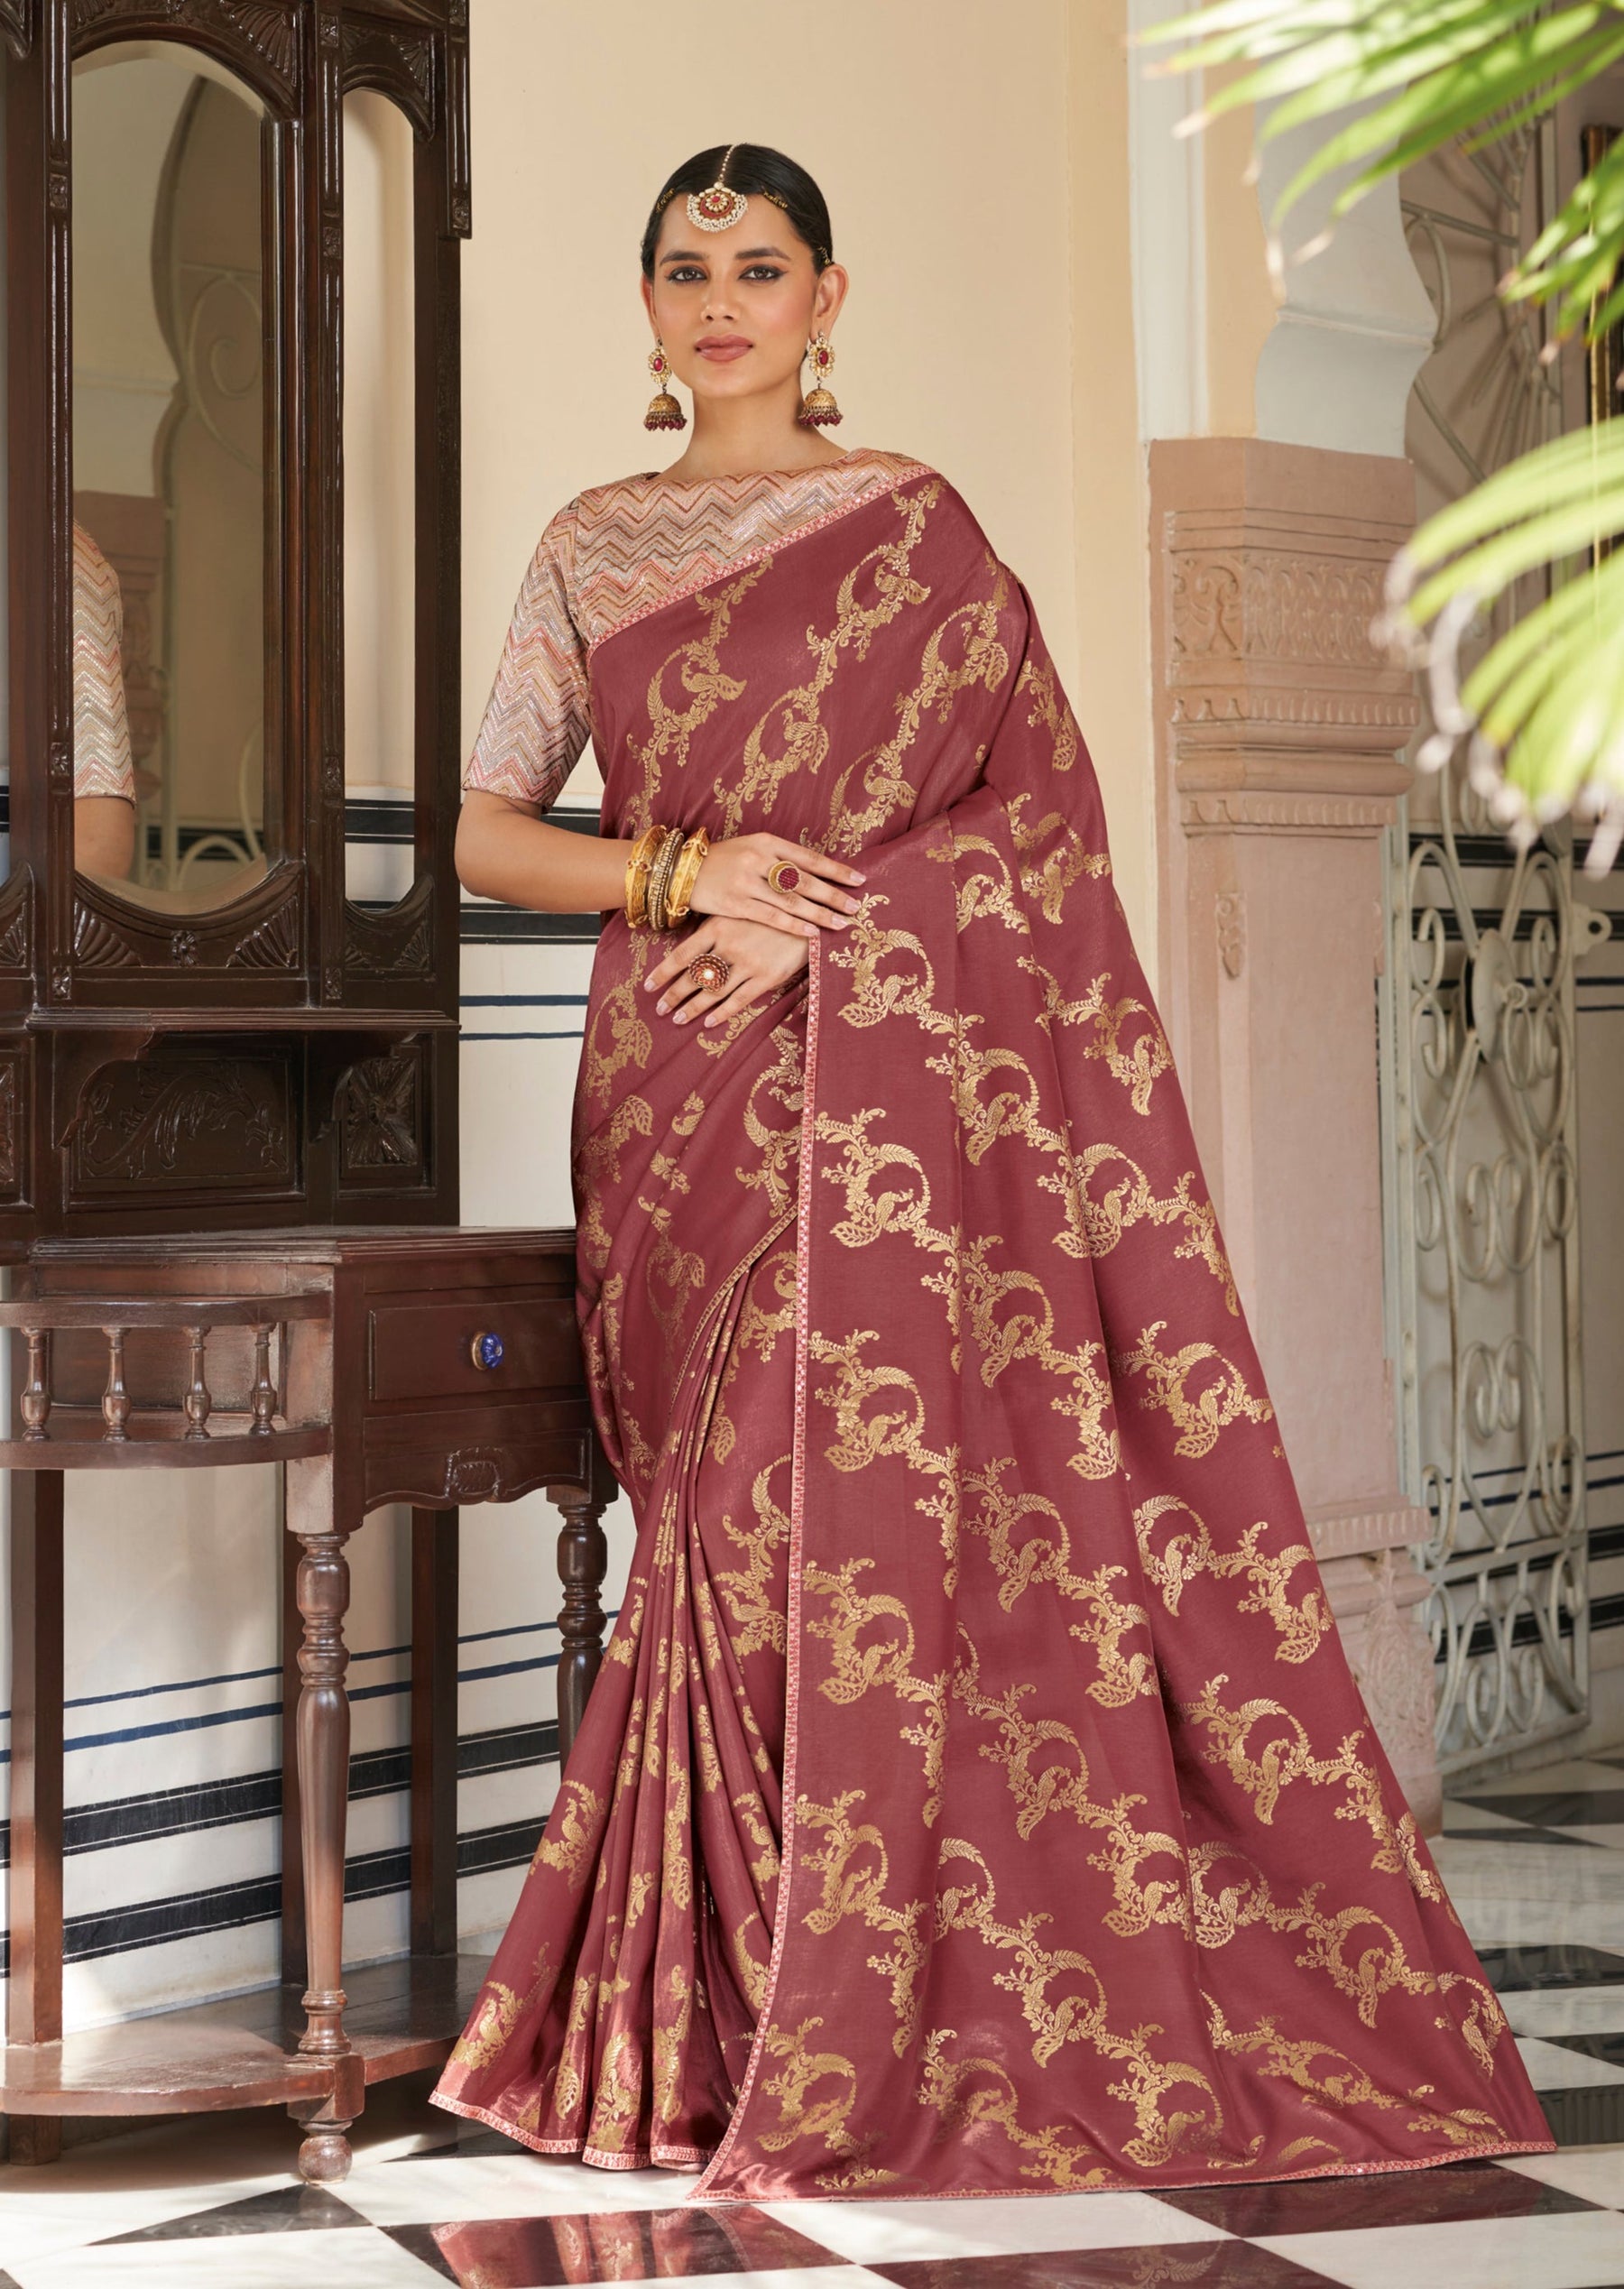 Peacock lehariya saree paired with heavily embroidered blouse-22022